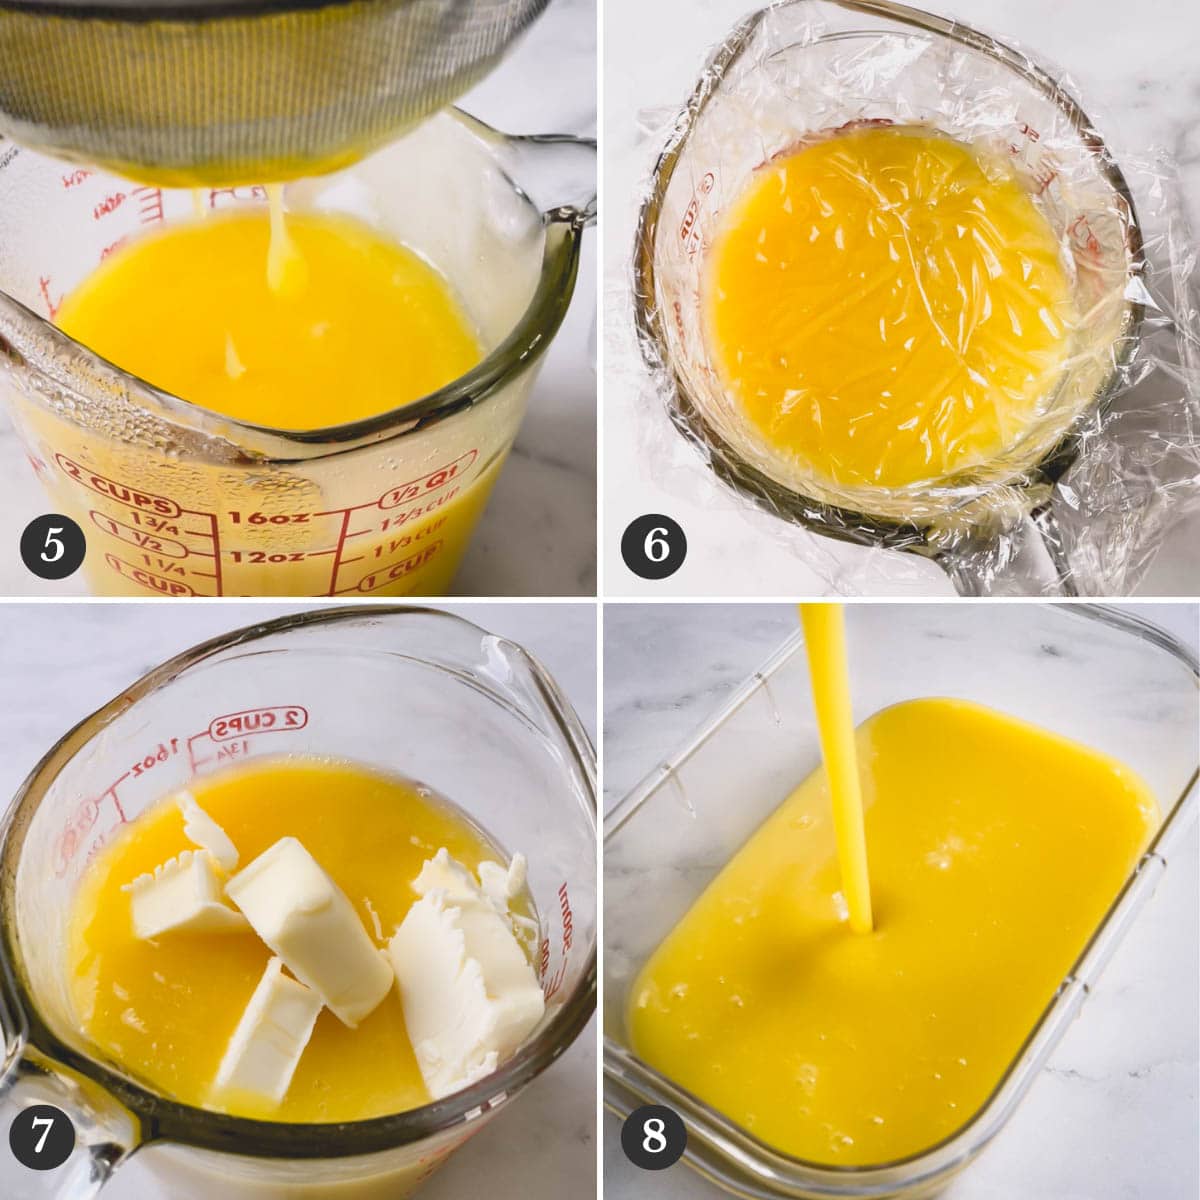 Step by step photos of straining the curd, cooling and adding butter into it.